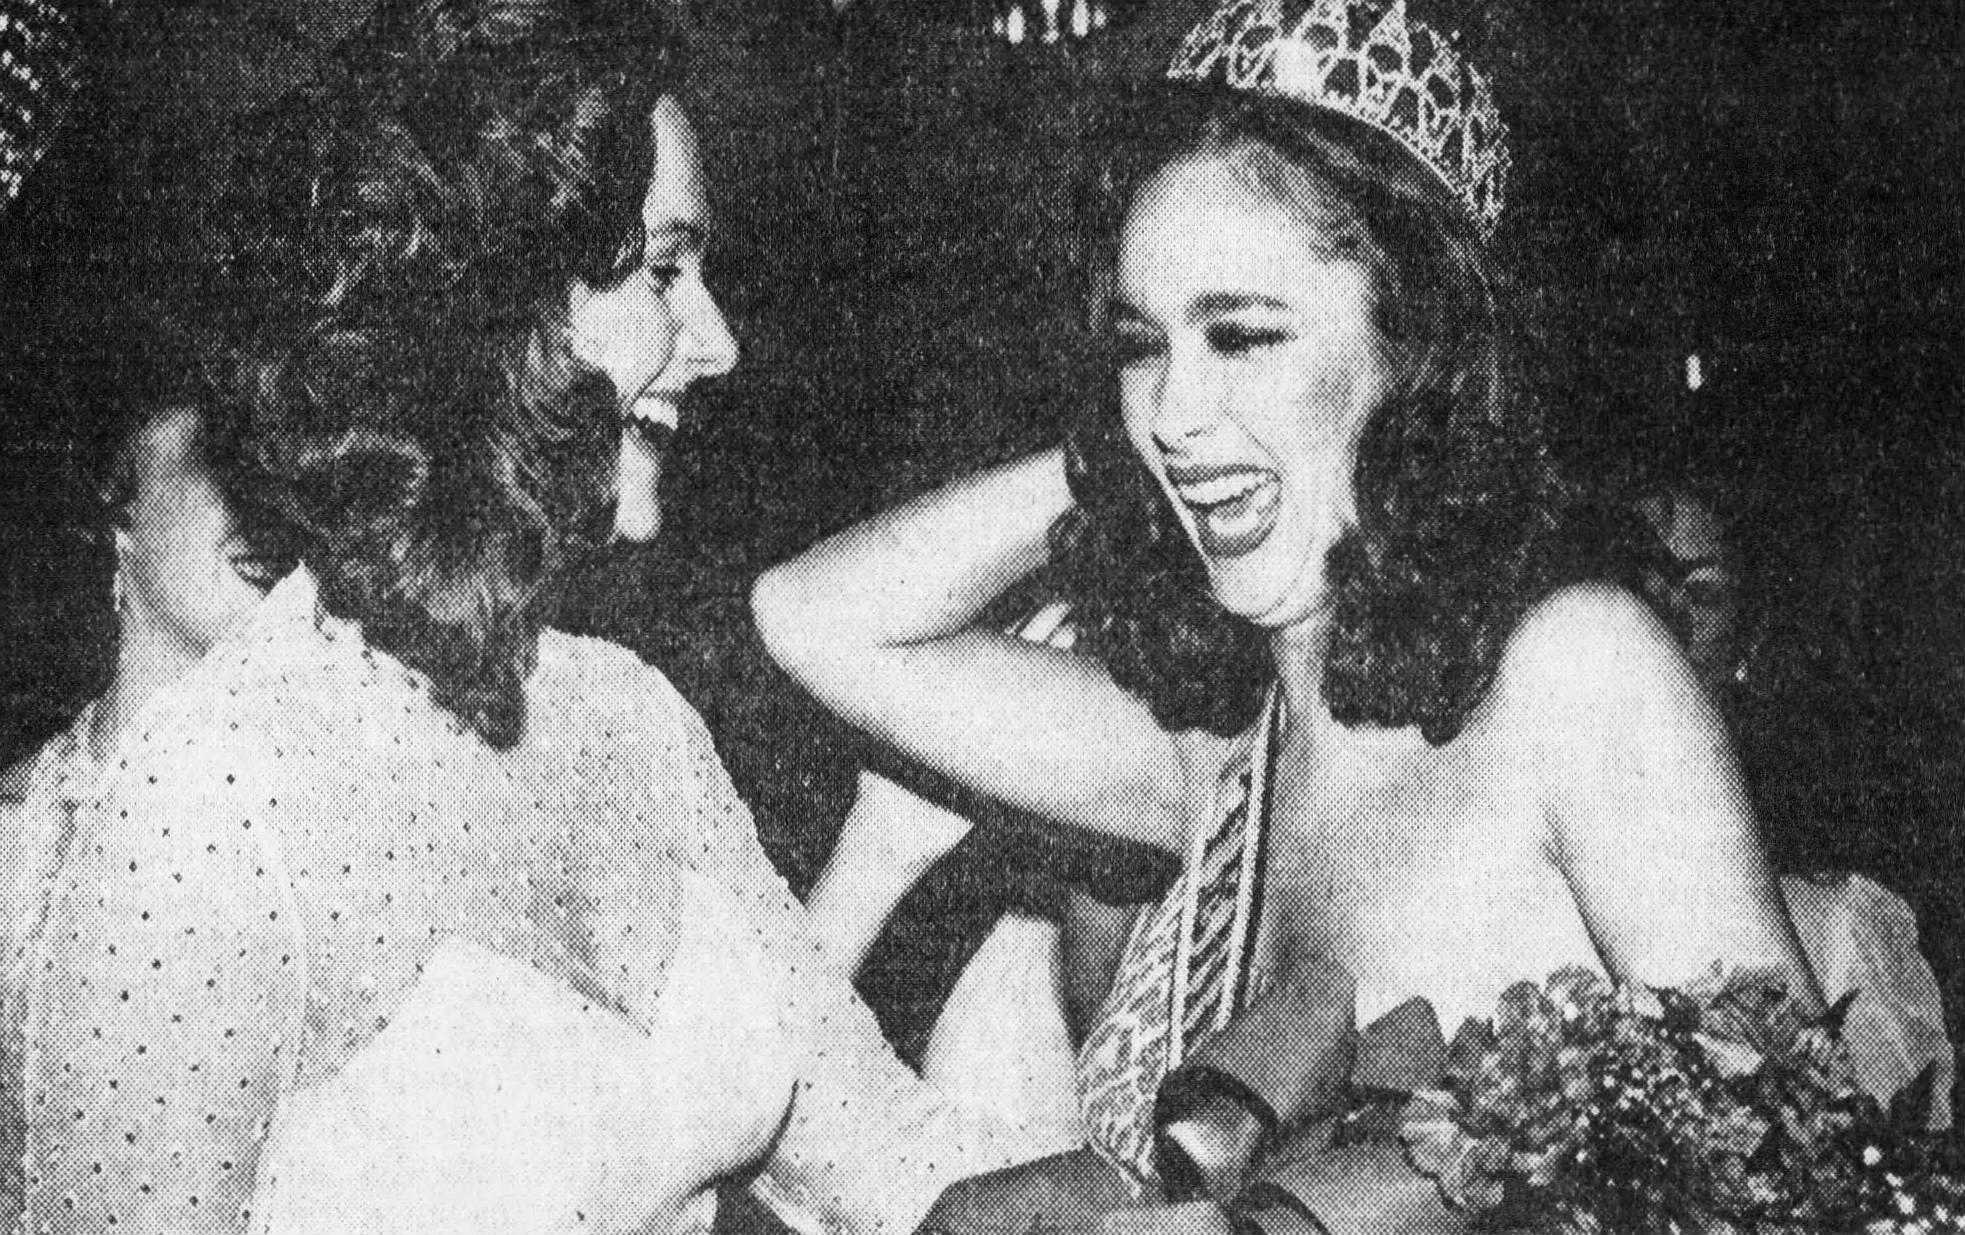 Sharon Kay Steakley reacts to winning Miss Tennessee USA 1981